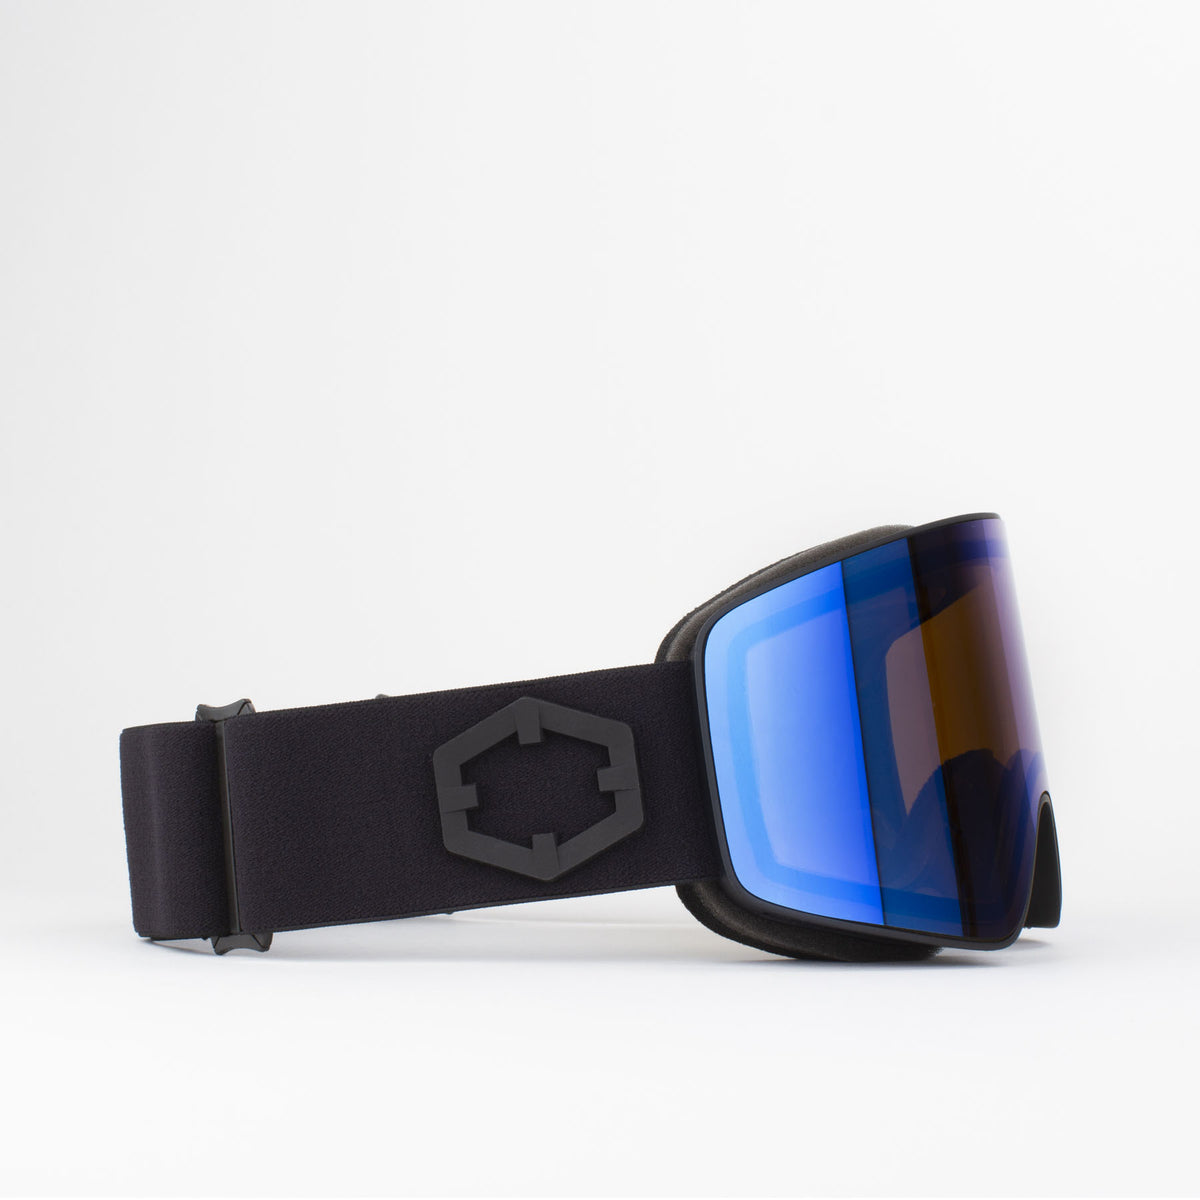 'OUT OF' VOID BLACK 'THE ONE' GELO WINTER GOGGLES